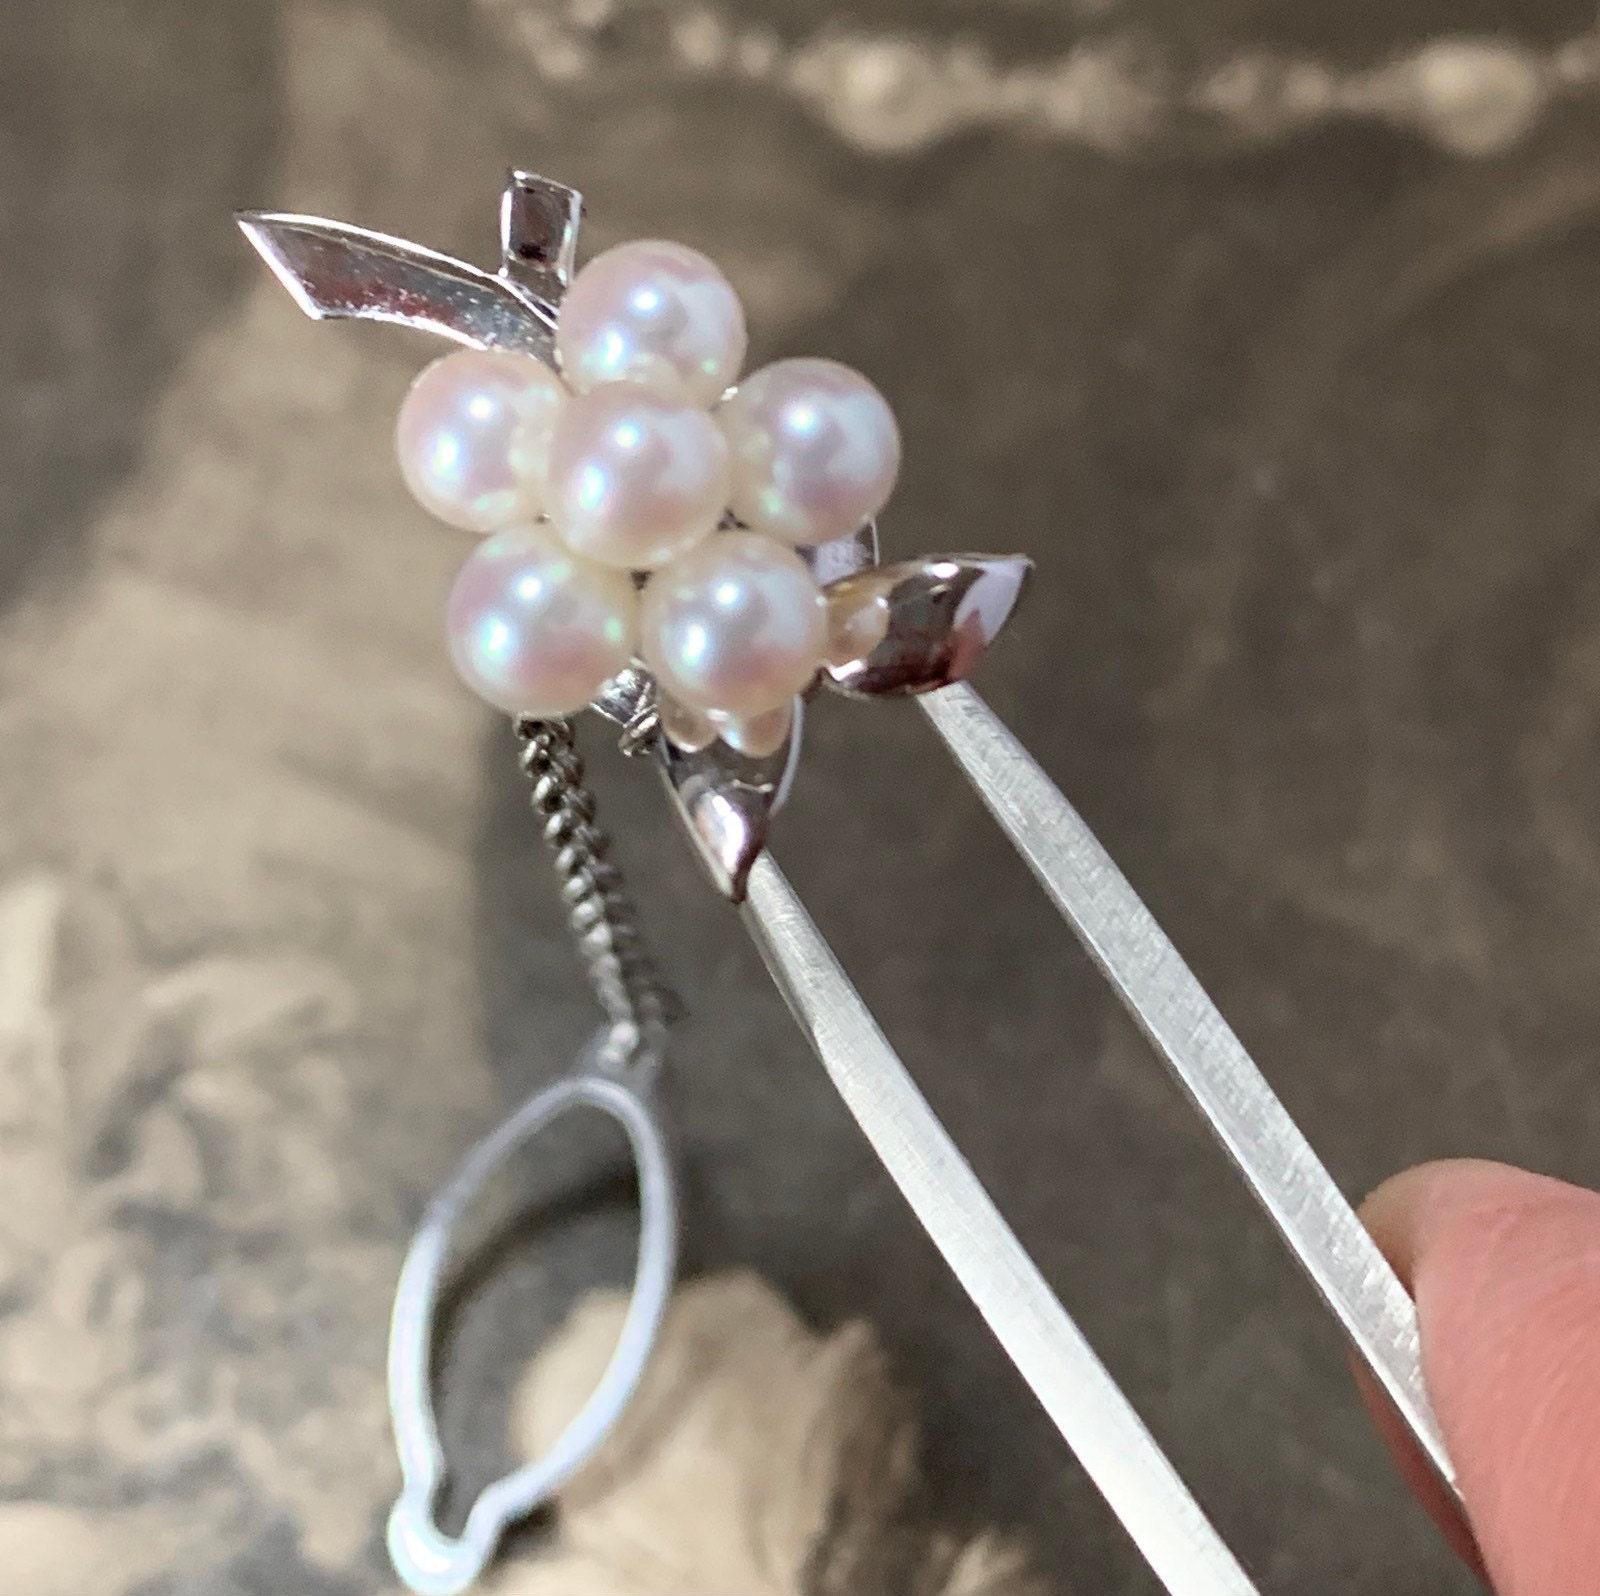 Vintage Mikimoto Pearl Brooch Lapel Dress Pin Or Tie Tack in Silver. This Is A Fabulous With Japanese Akoya Pearls Set To Rose Design